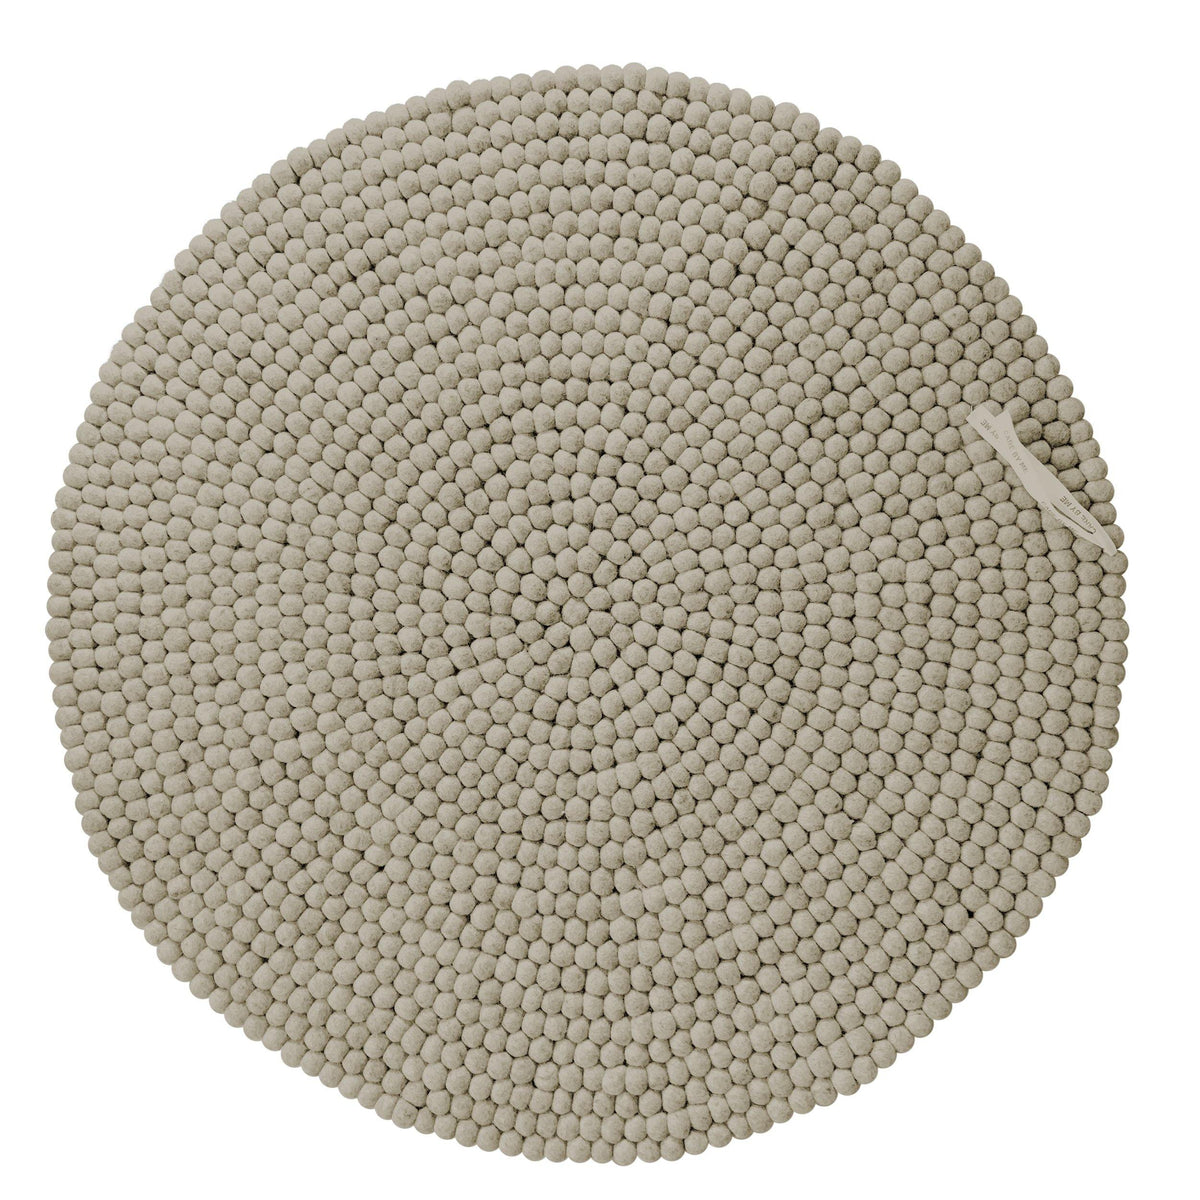 CARE BY ME Snow Drop Rug